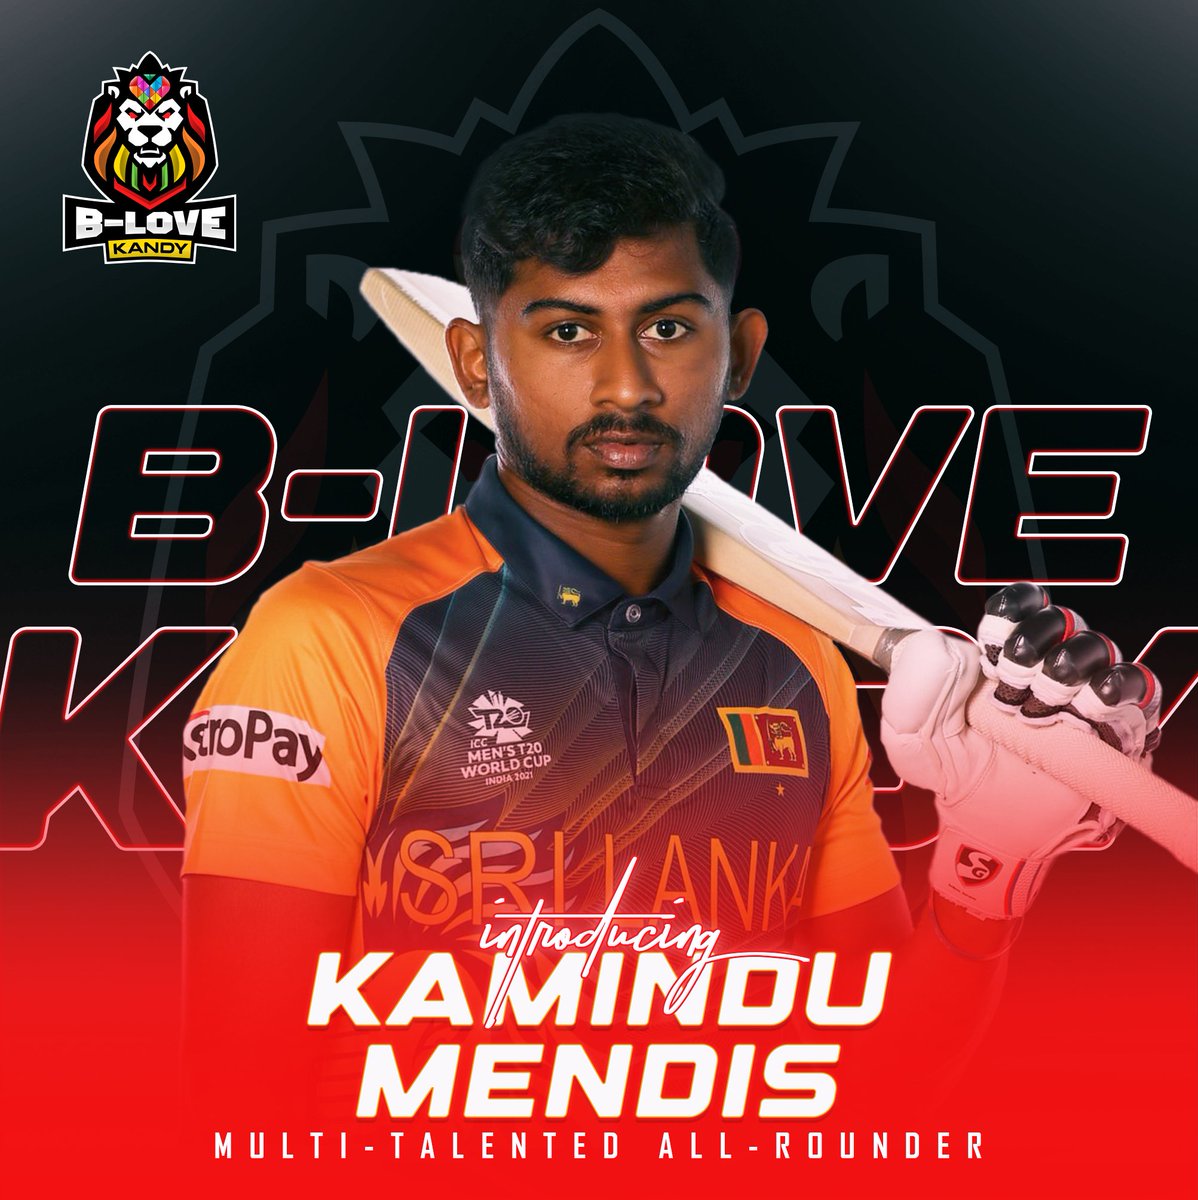 🏏🔥 Introducing Kamindu Mendis, Sri Lanka's Multi-Talented All-Rounder! ✨

Get ready to witness the remarkable skills and versatility of Kamindu Mendis.🌟🏆 From his explosive batting to his crafty spinners, he has it all!

#KaminduMendis #BLoveKandy #LPL2023 #LPLT20 #Cricket